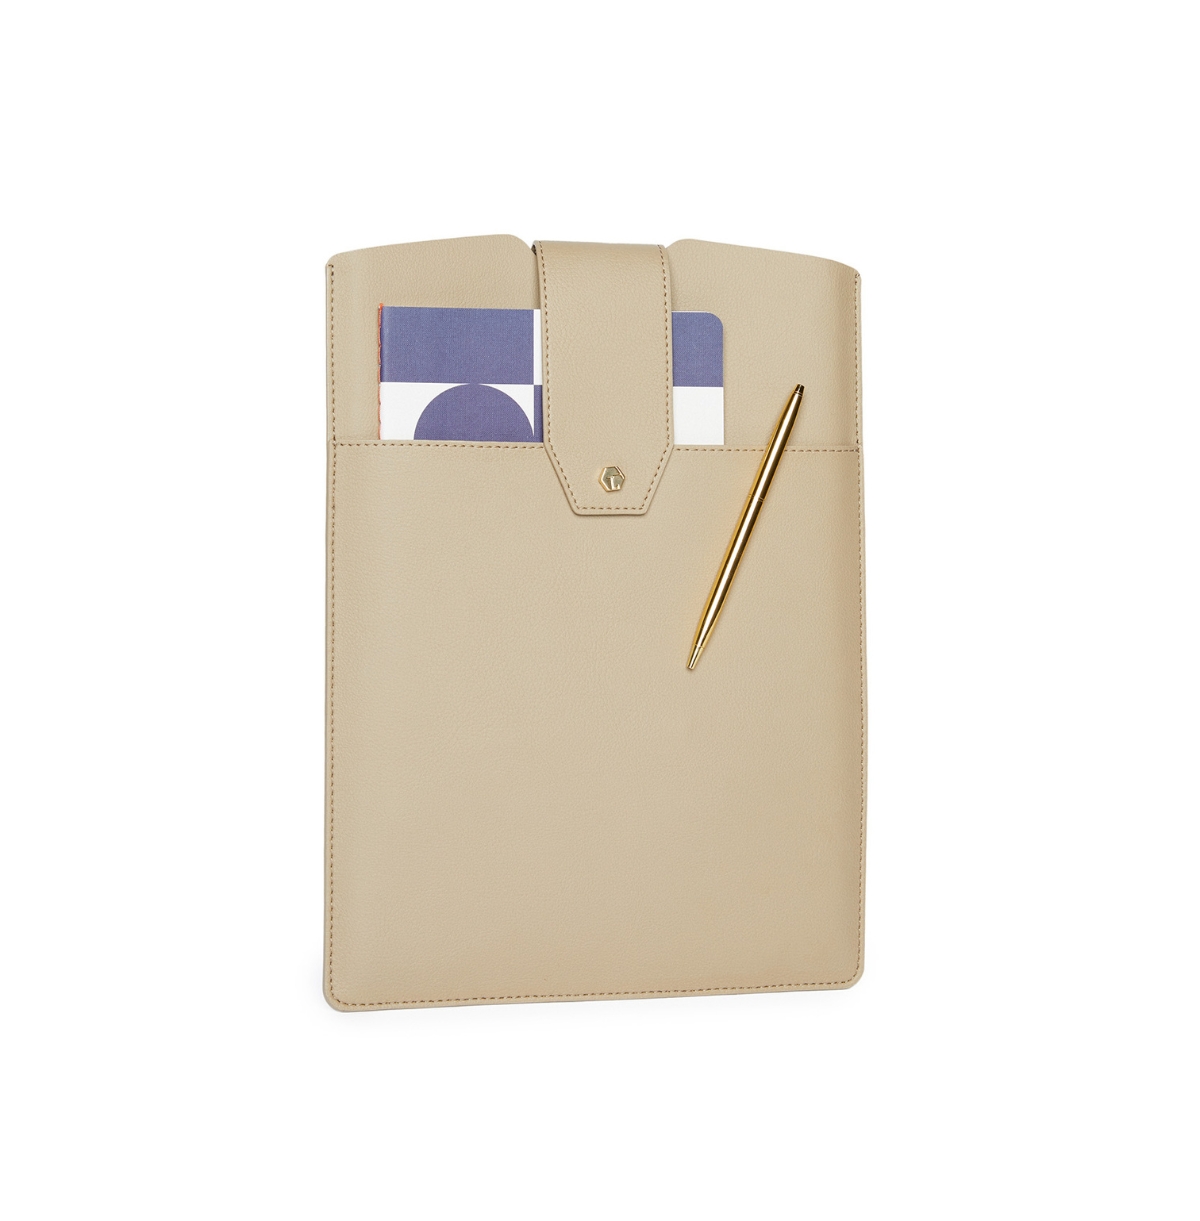 The Daily Laptop Clutch - Beige